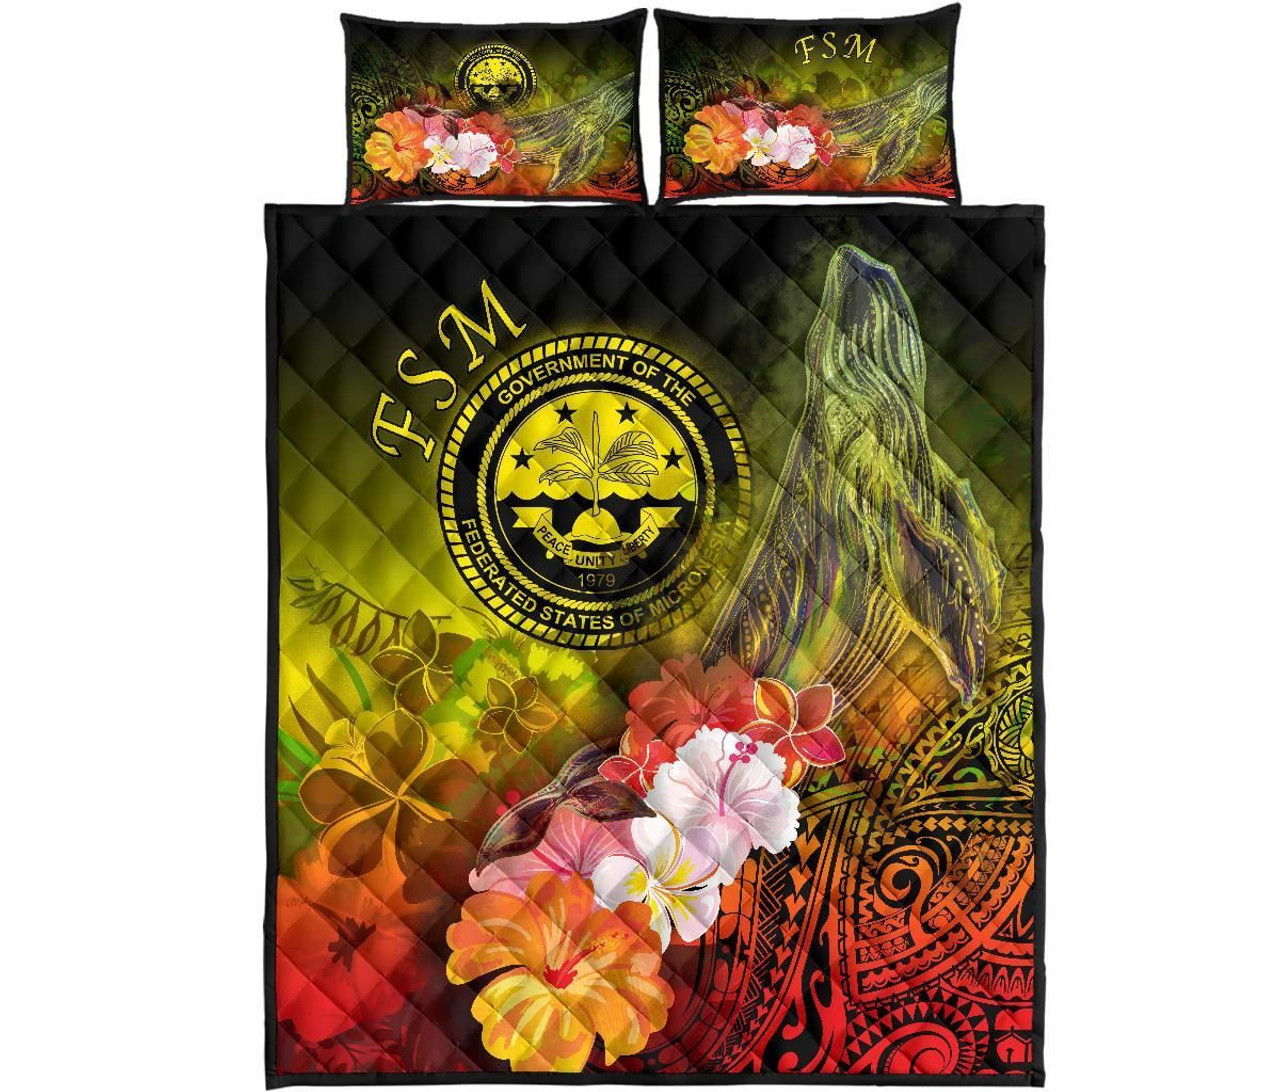 Federated States of Micronesia Quilt Bed Set - Humpback Whale with Tropical Flowers (Yellow) 5